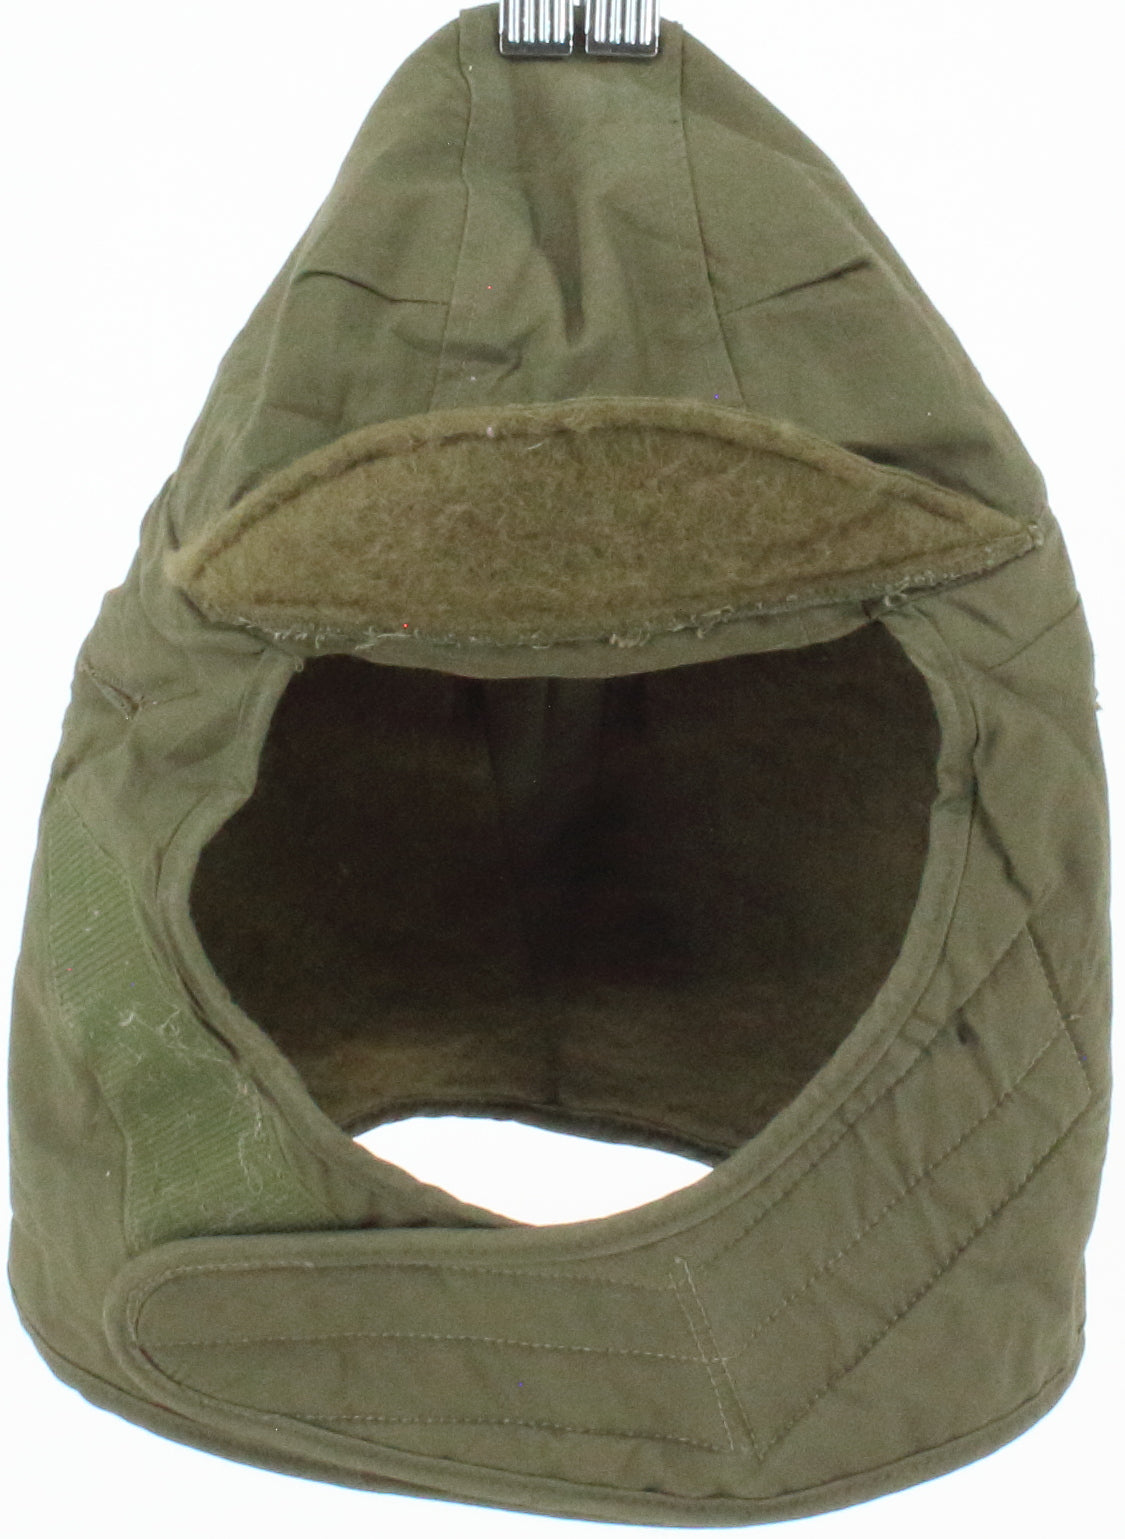 M&B Headwear Co. Military Green Cap Cold Weather Insulating Helmet Liner